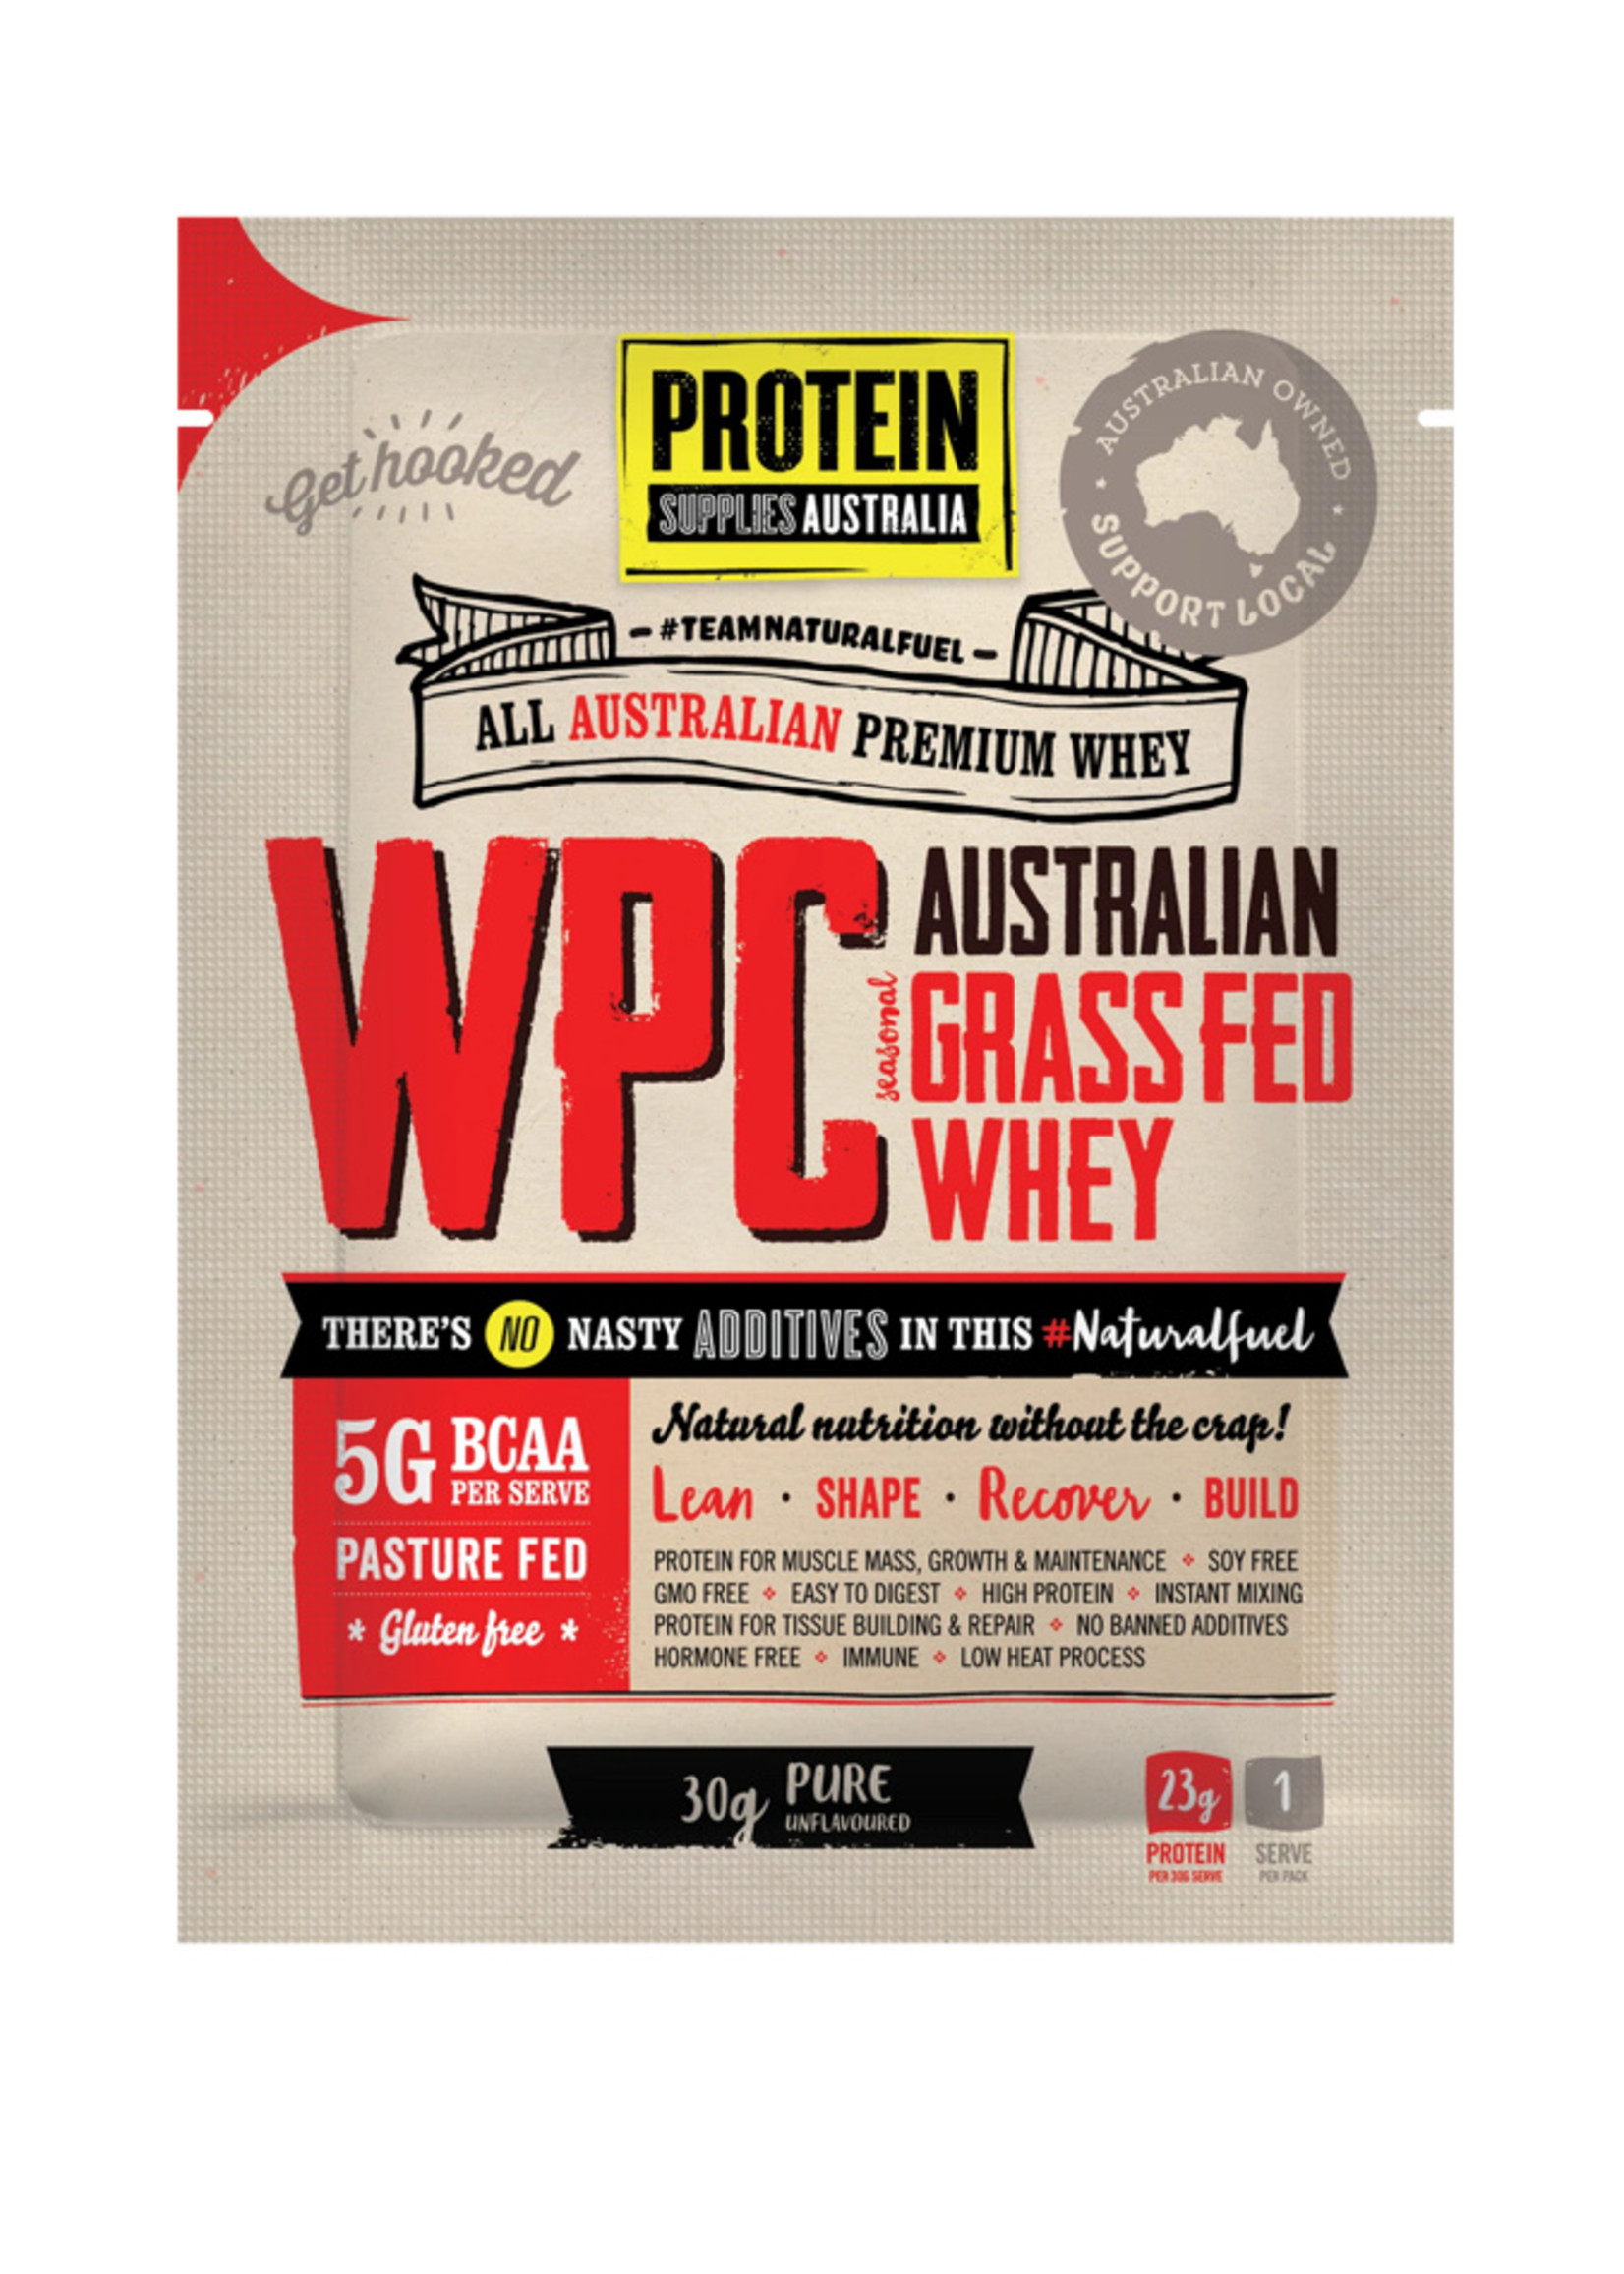 PROTEIN SUPPLIES AUST. Protein Supplies Australia WPC (Whey Protein Concentrate) PURE 500g